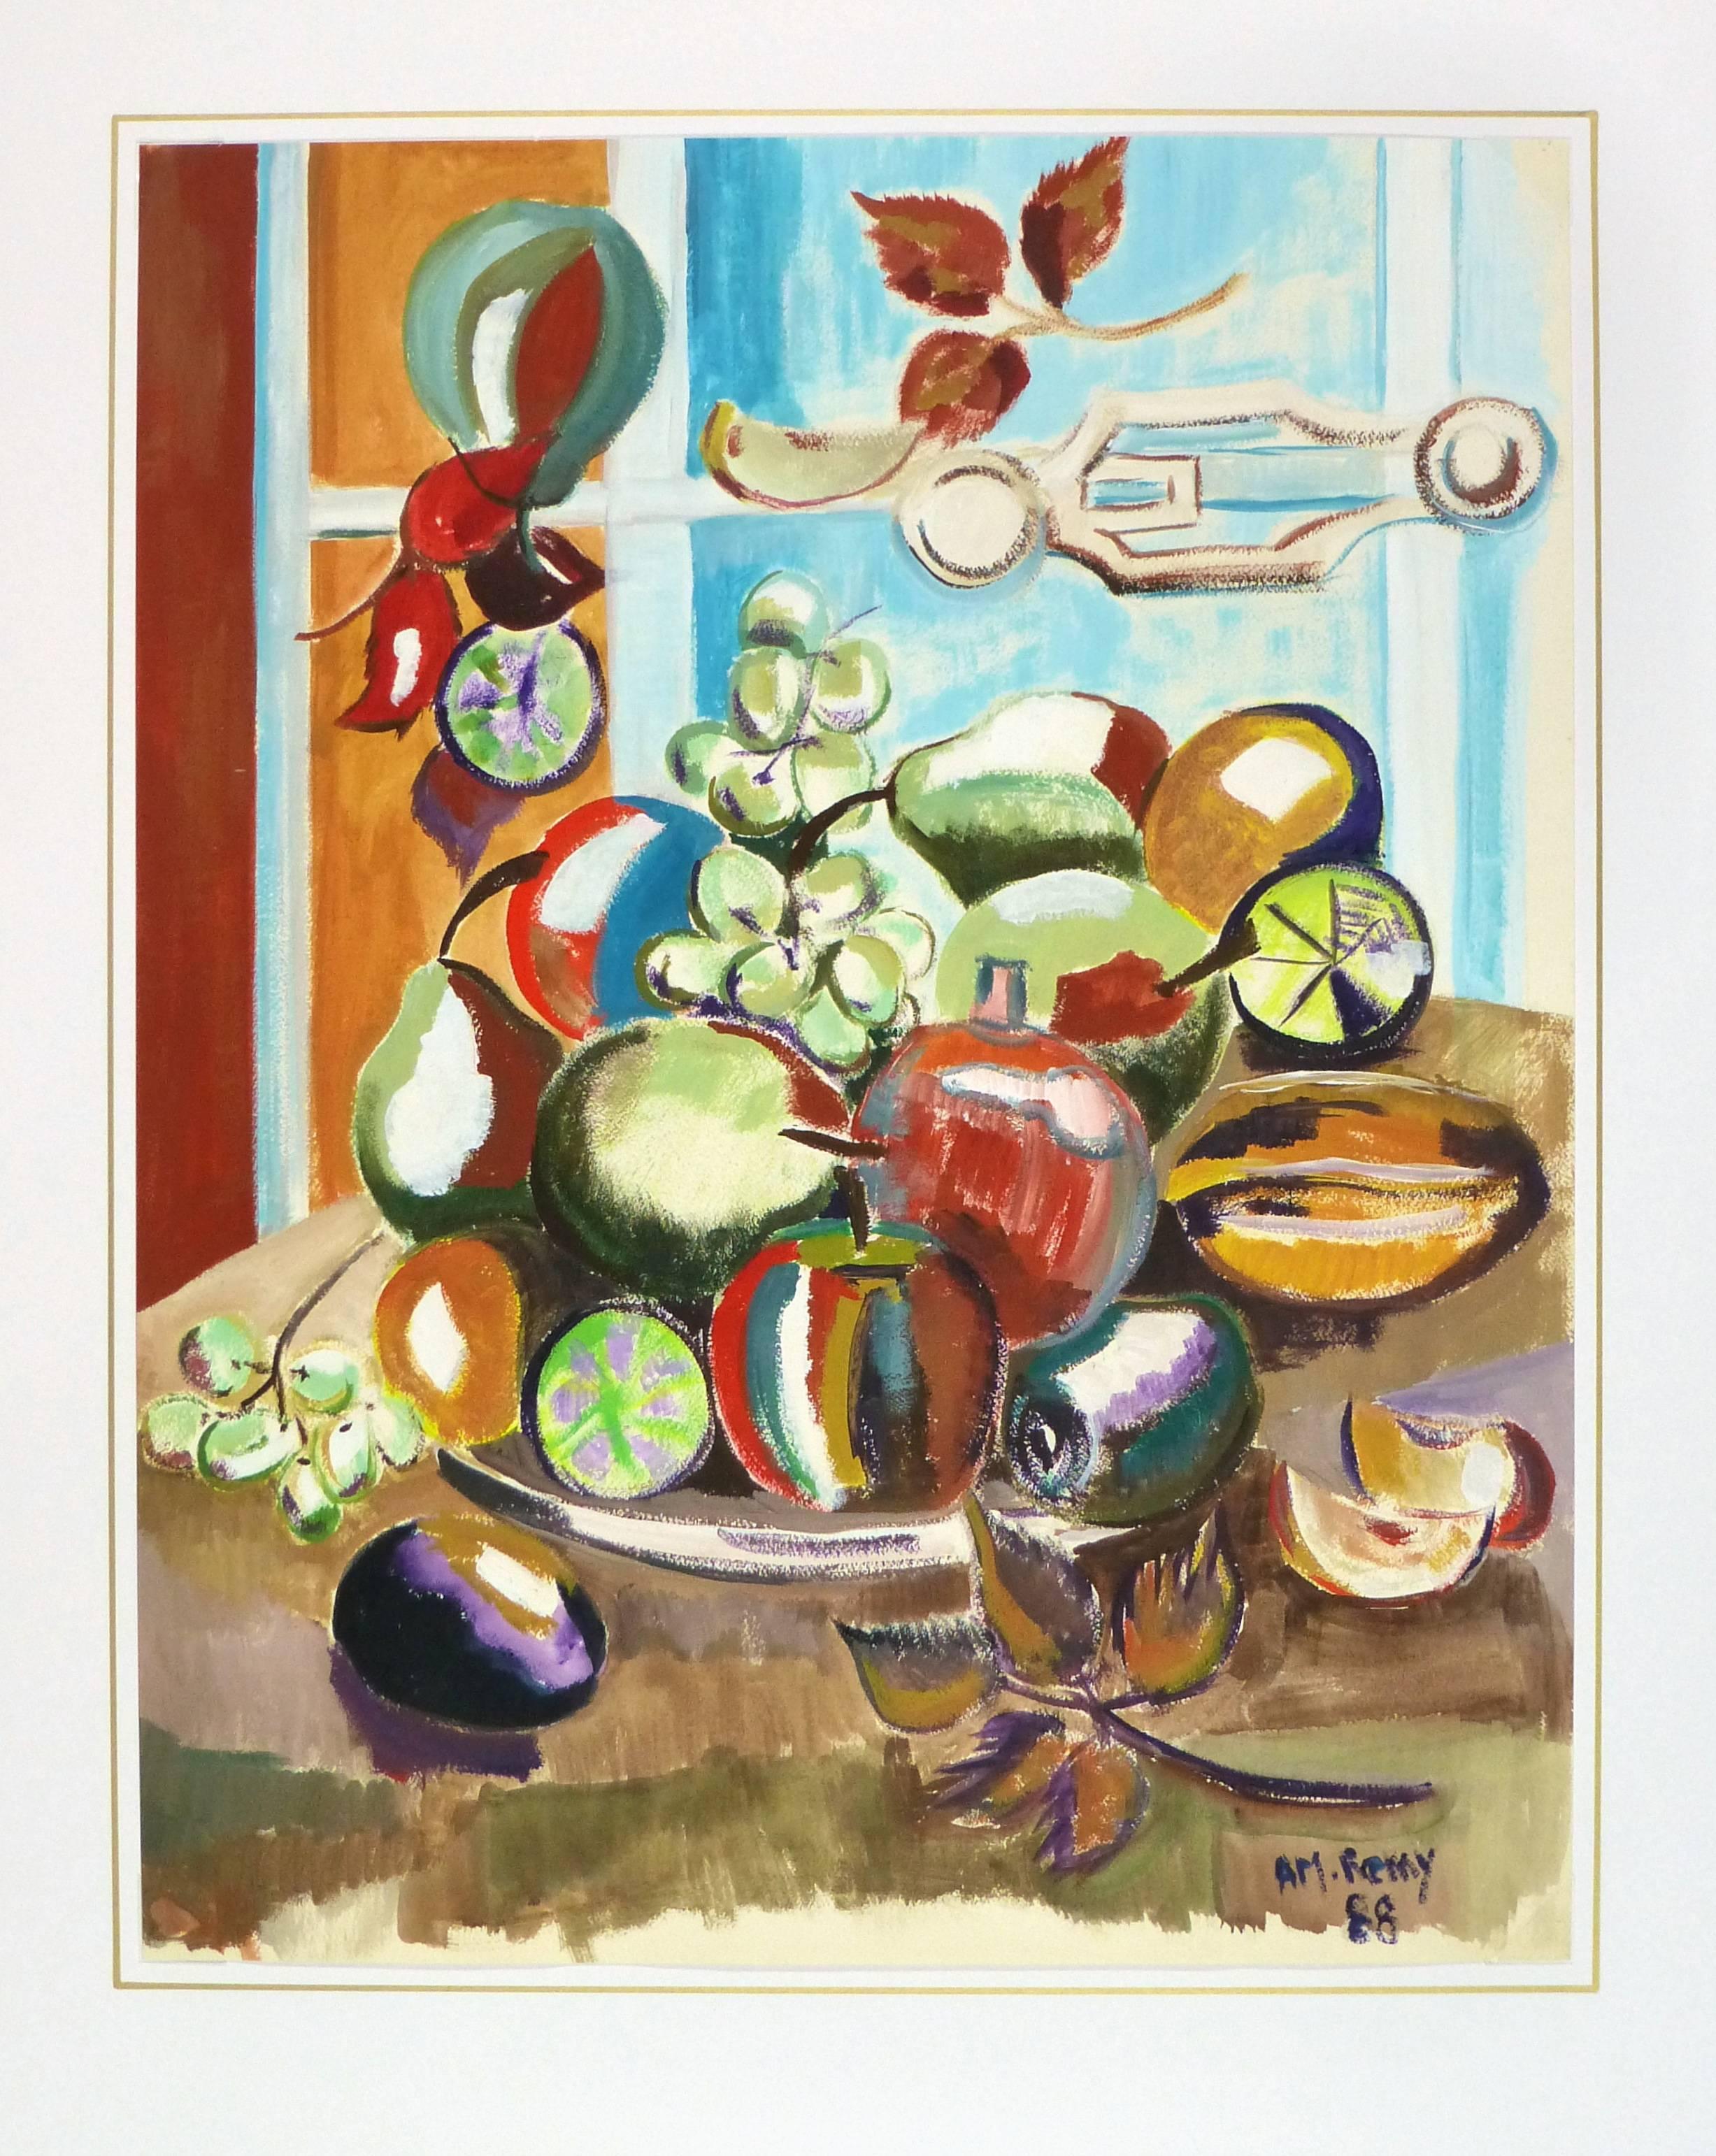 Eye-catching still life of fruit in front of window with striking use of color by French artist AM. Remy, 1988. Signed and dated lower right.

Original one-of-a-kind vintage work of art on paper displayed on a white mat with a gold border. Mat fits